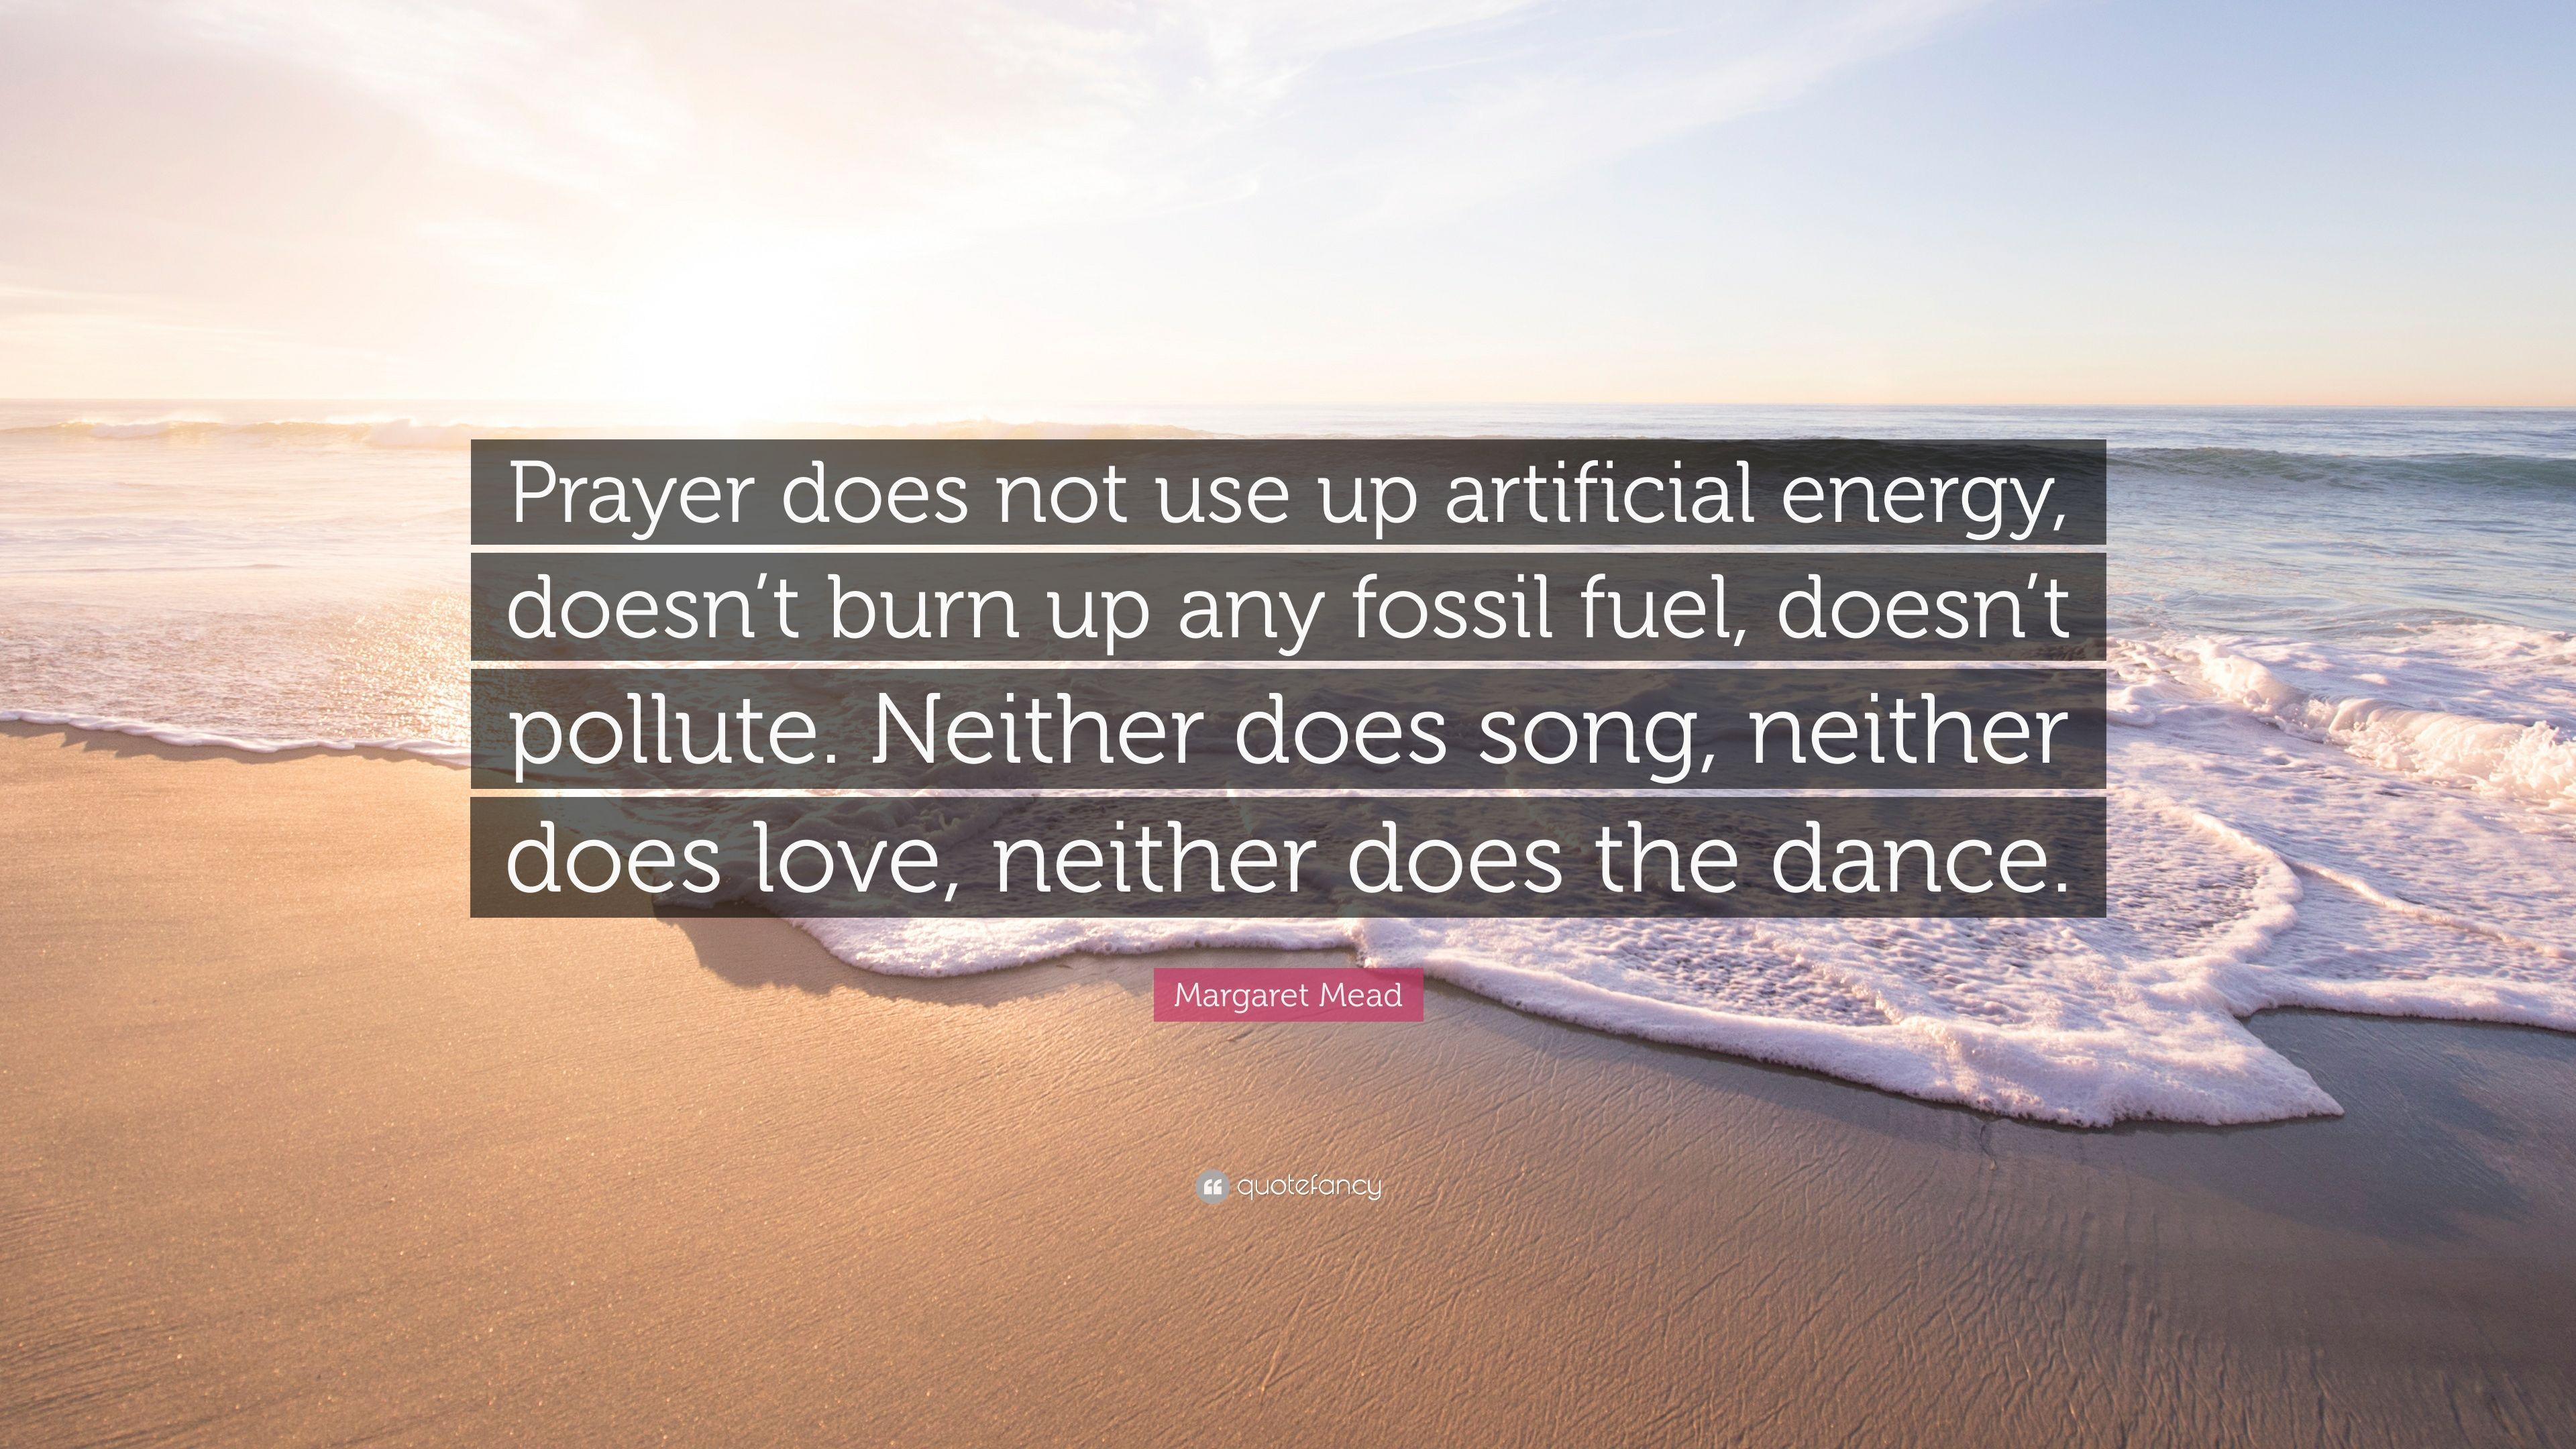 Margaret Mead Quote: “Prayer does not use up artificial energy